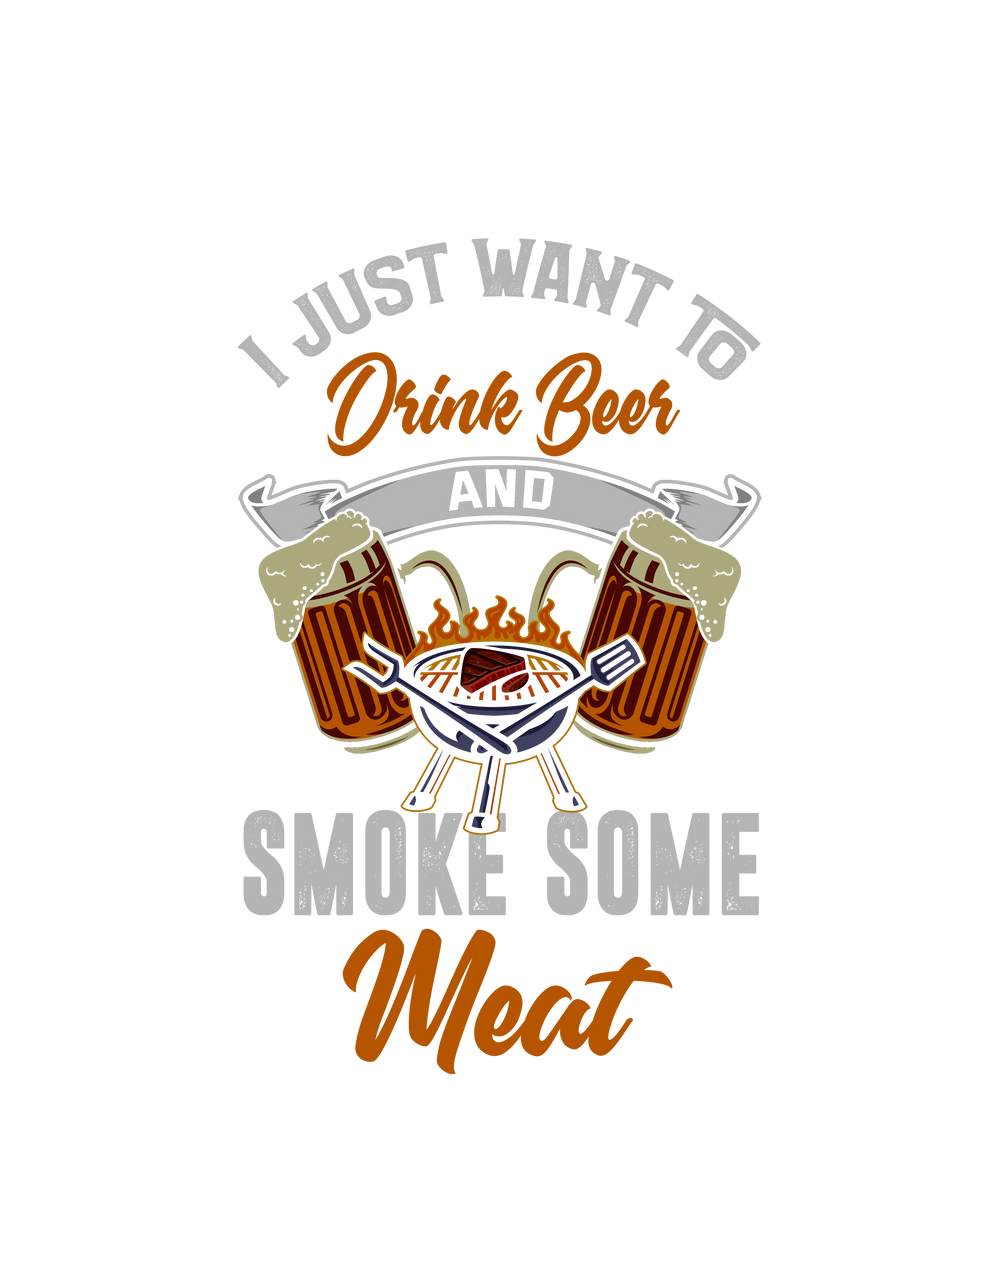 Drink Beer and Smoke Meat Tee